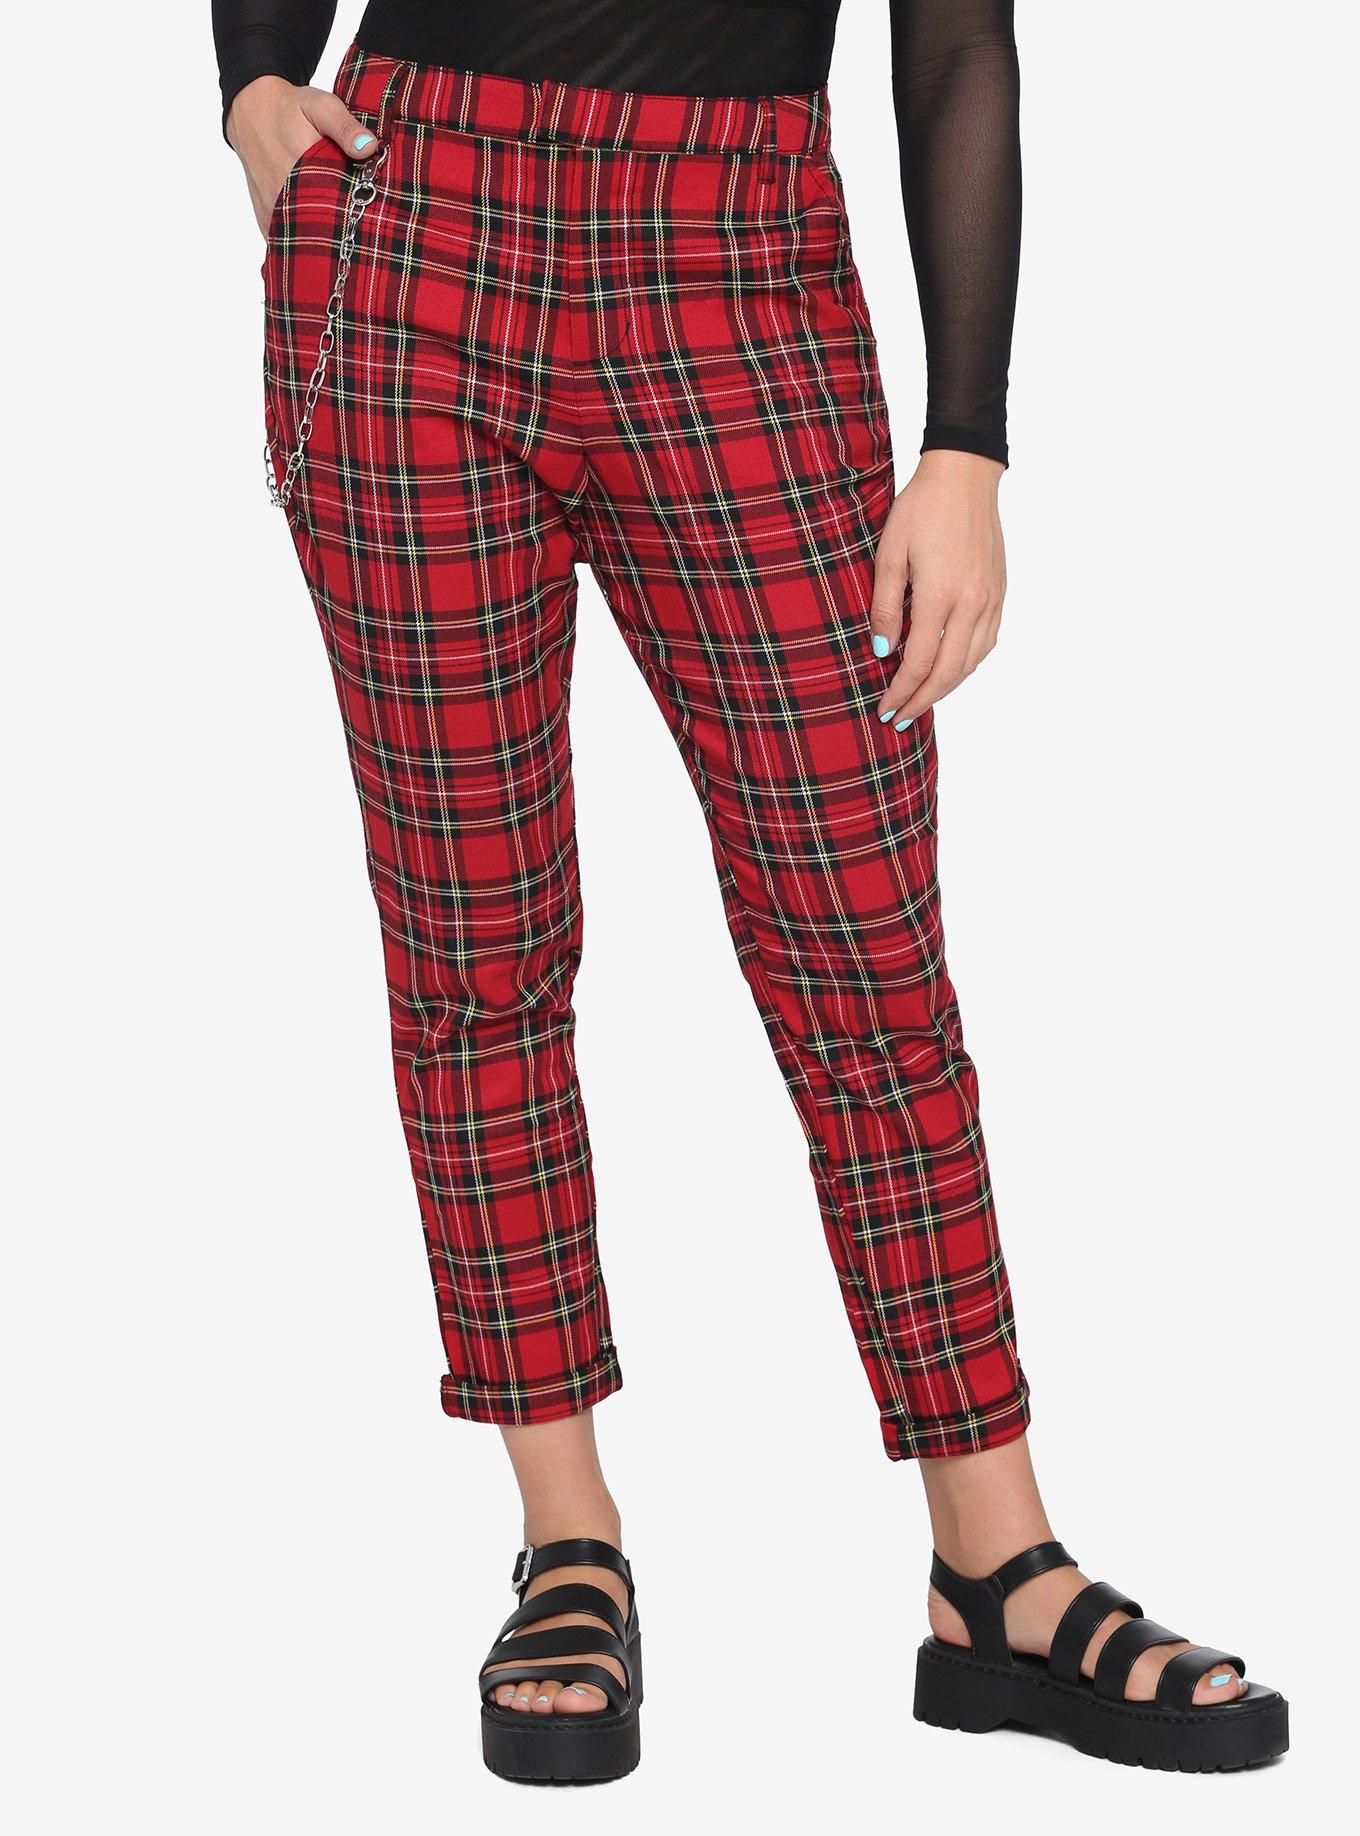 Hot Topic, Pants & Jumpsuits, Hot Topic Yellow Plaid Pants Large Trousers  Stretch Womens Punk Goth Clueless